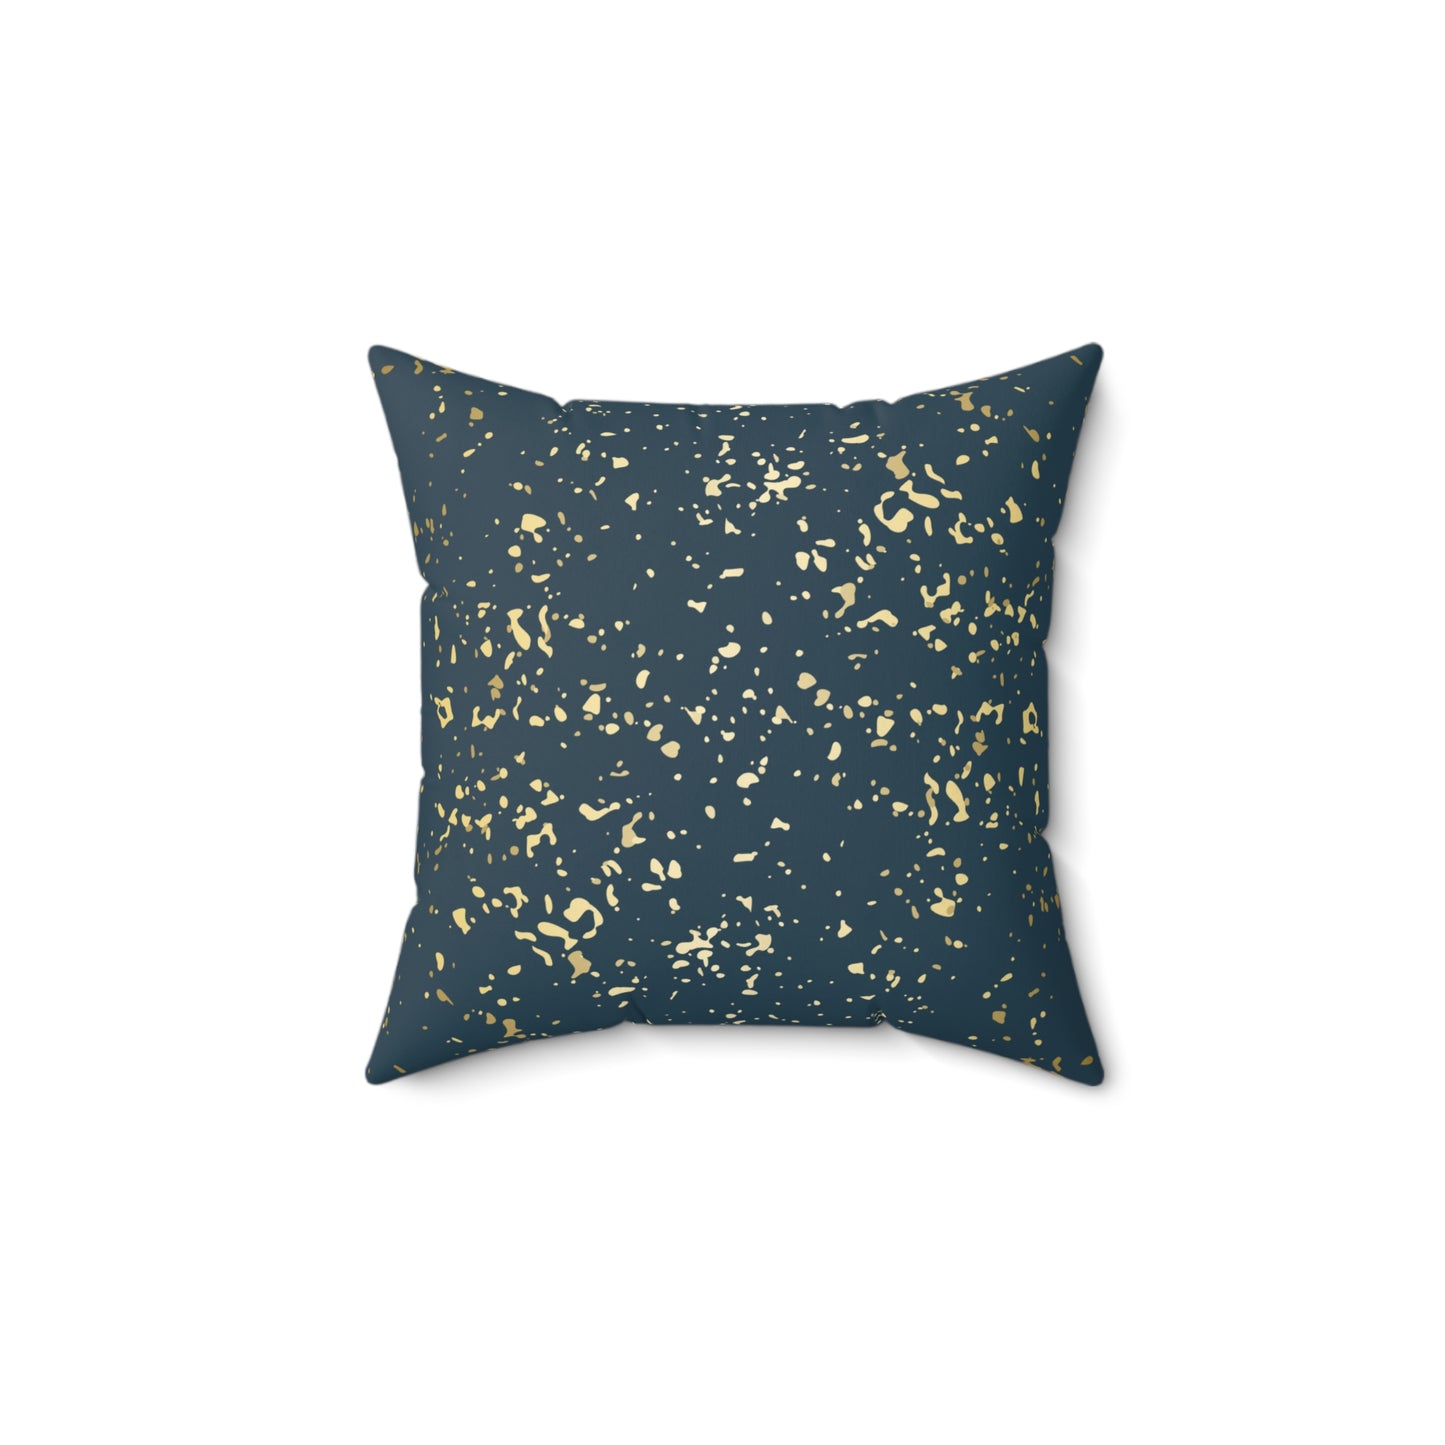 Dark Teal and Gold Flakes Throw Pillow